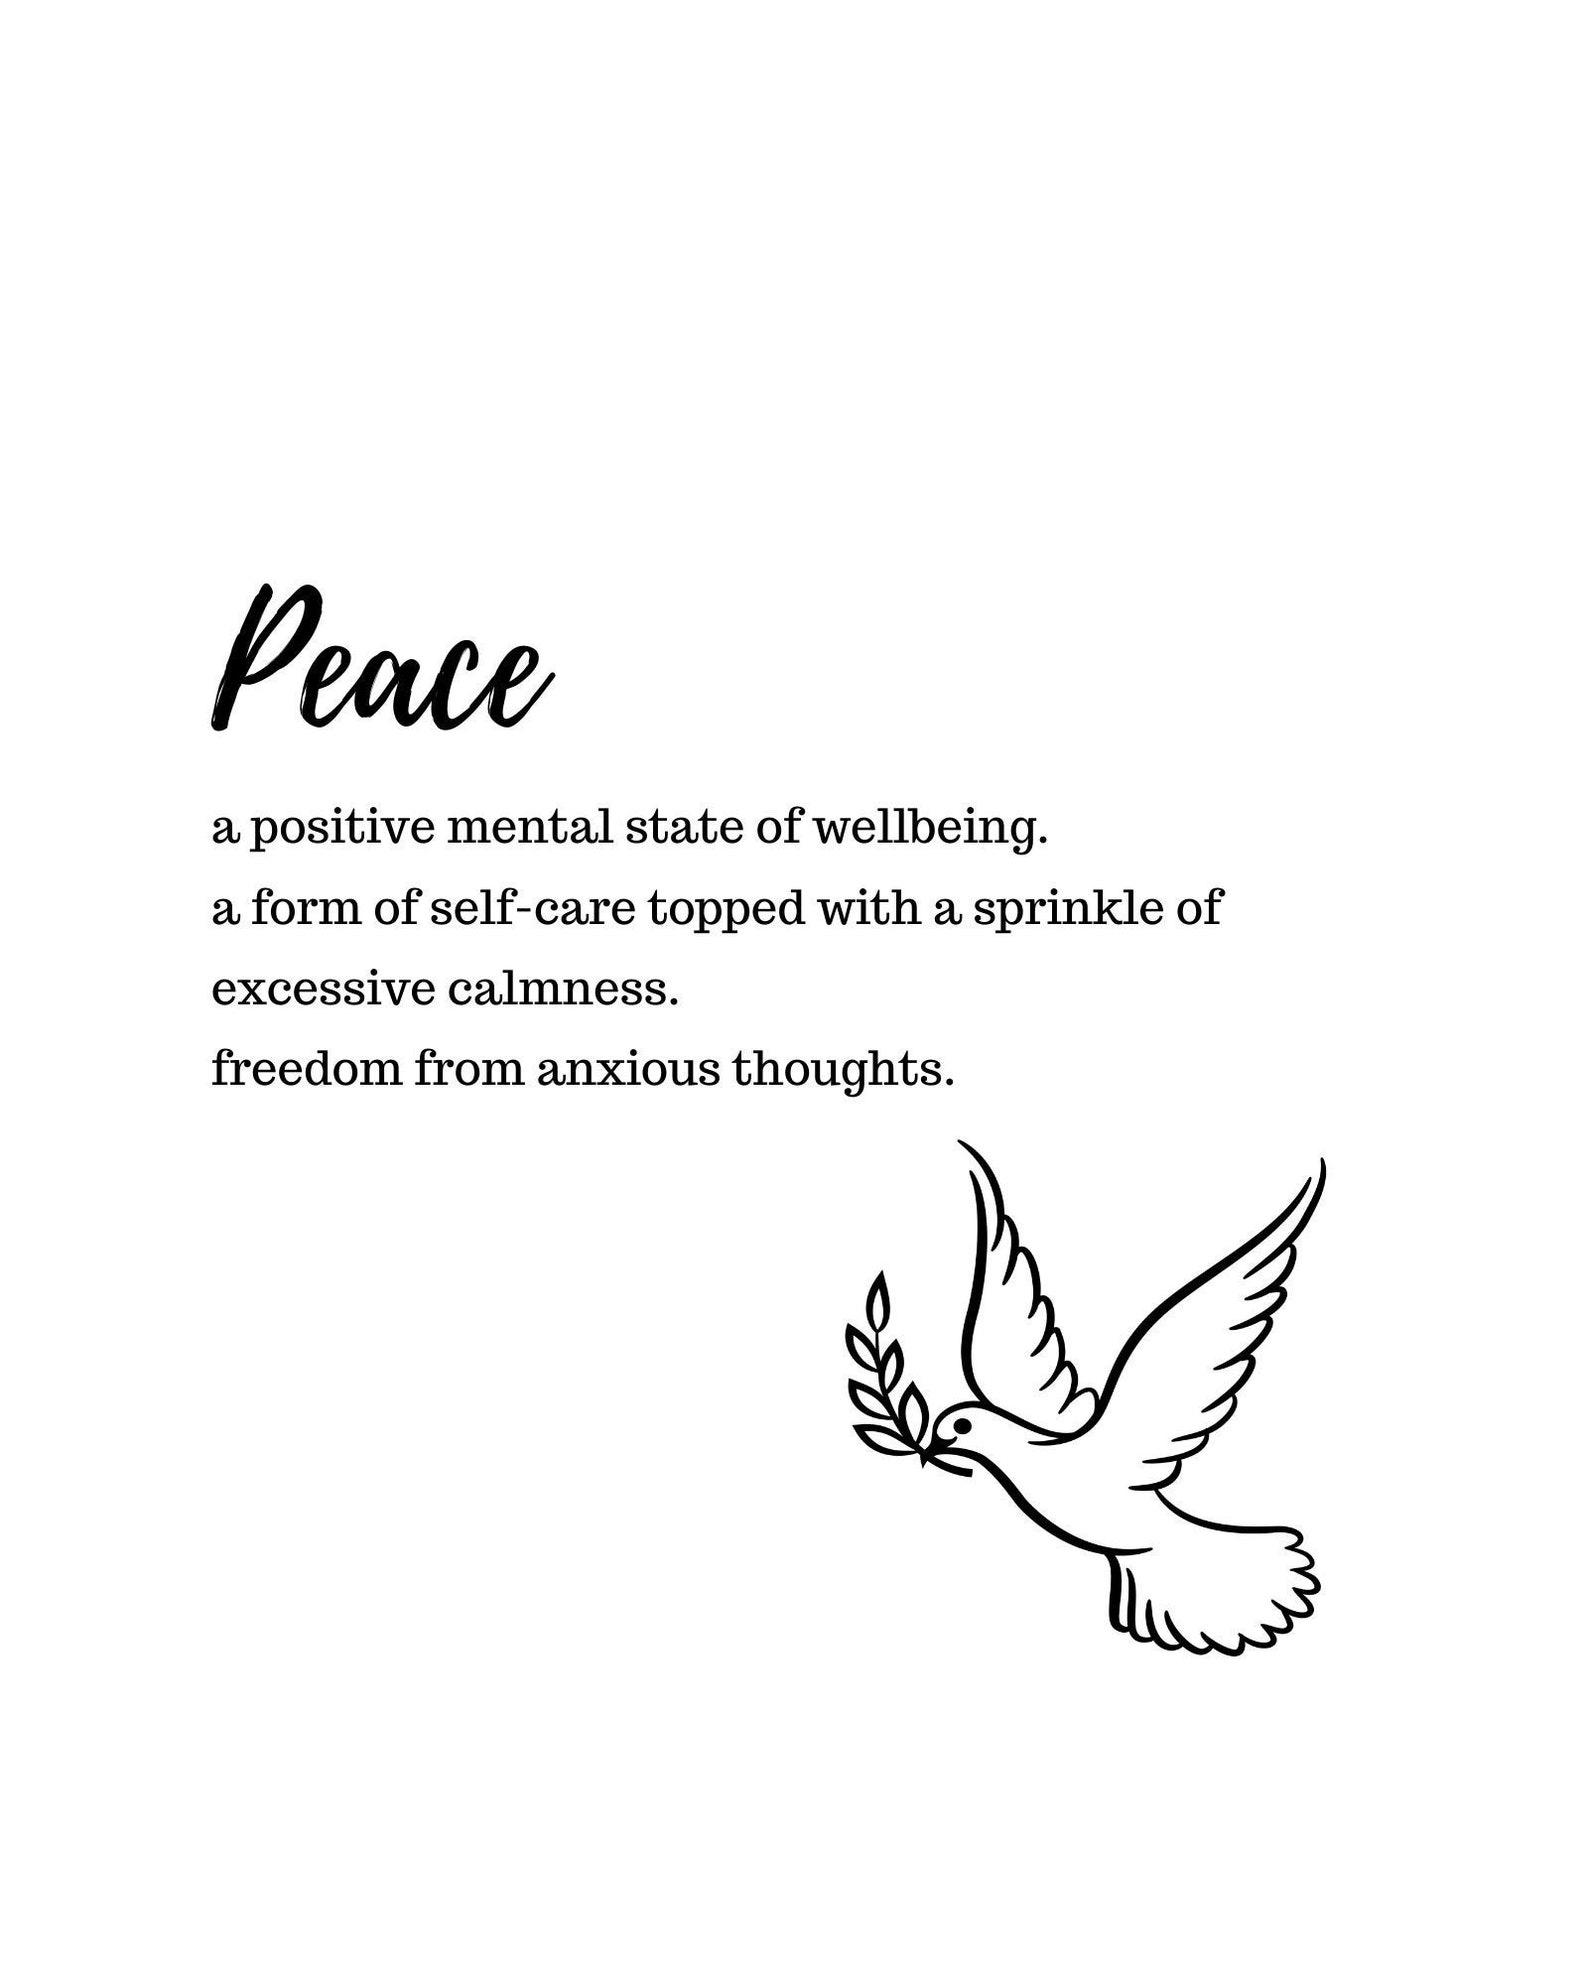 Albums 98+ Images what is the meaning of peace out Sharp